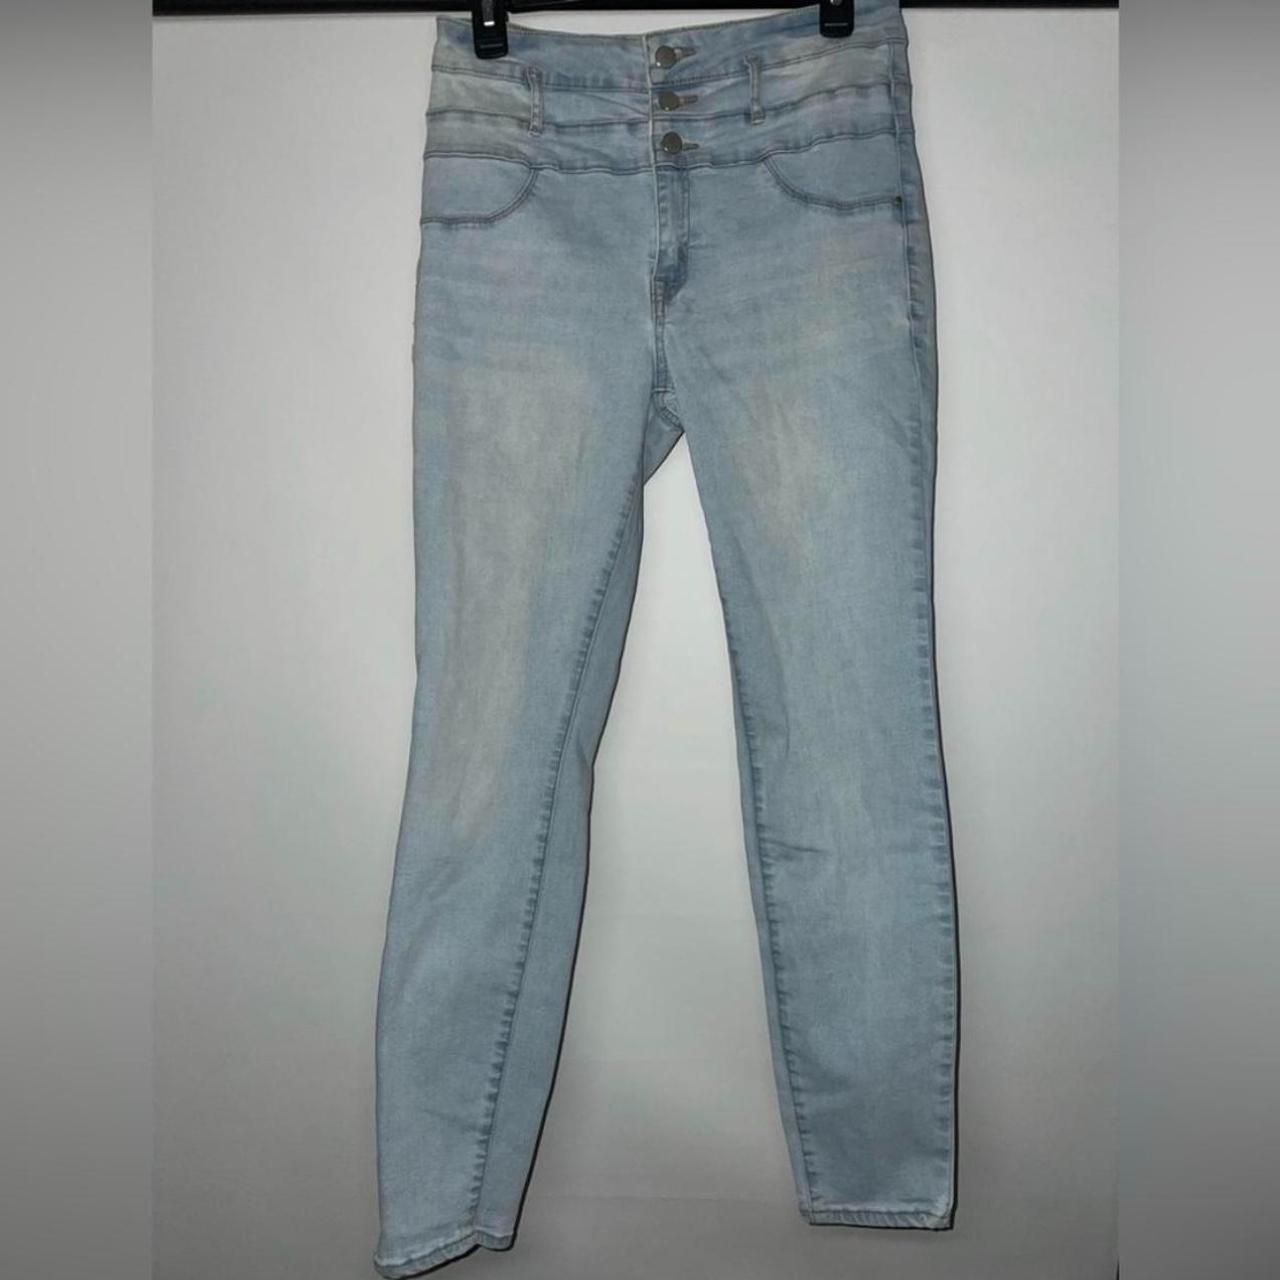 High Wasted Light Wash Jeans Size 10 In Great... - Depop